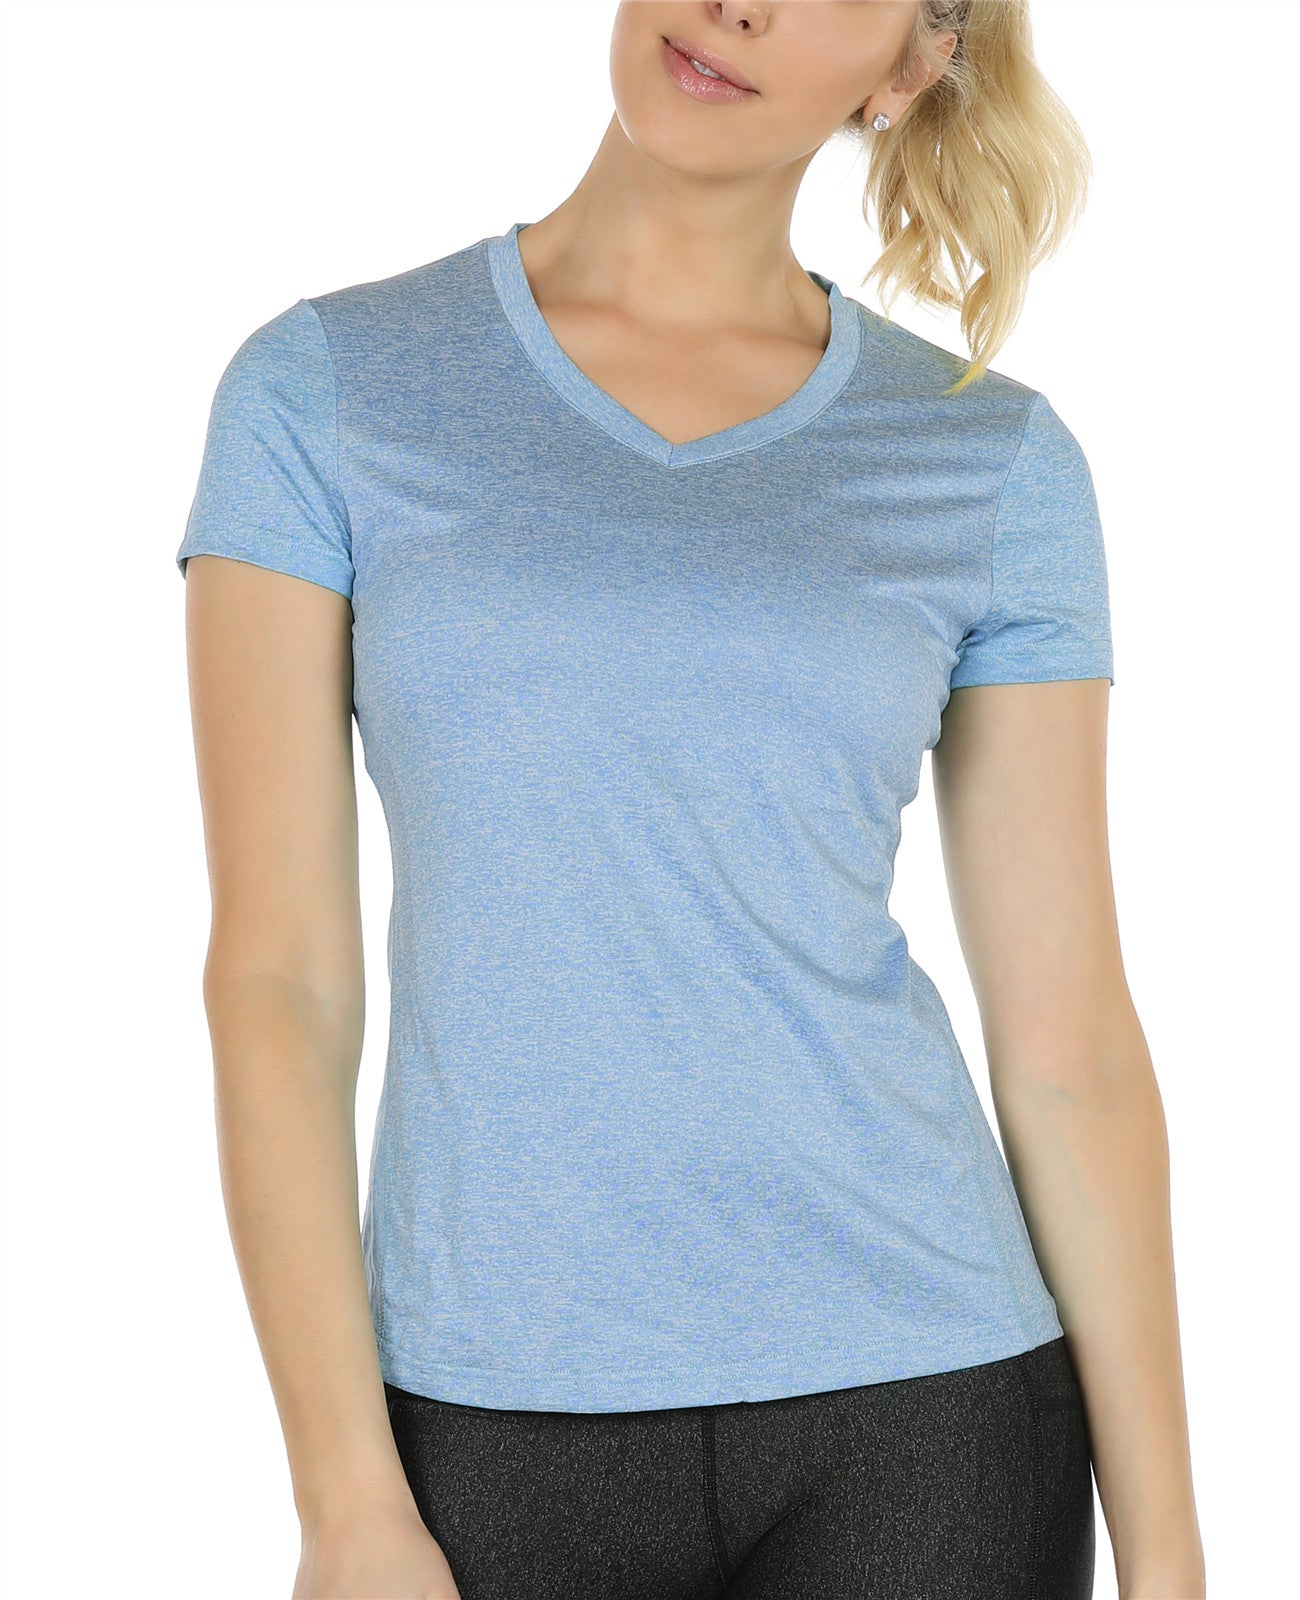 coolbaby Women's Lightweight Athletic Sport Workout Yoga Tshirts